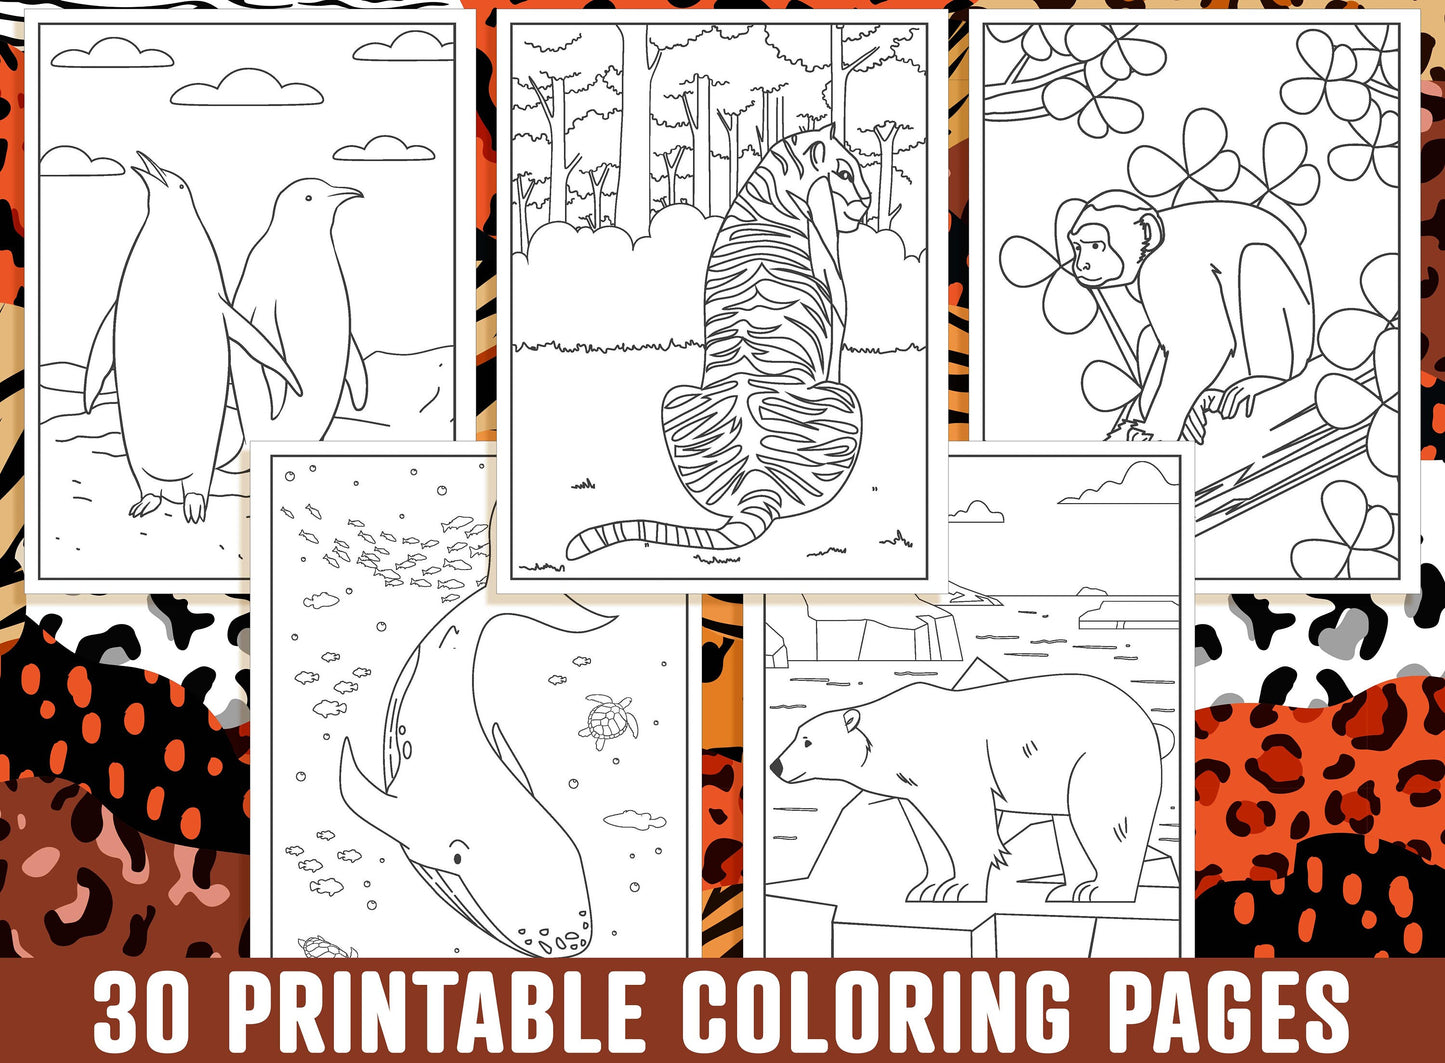 Wild Animal Coloring Pages, 30 Printable Wild Animal Coloring Pages for Kids, Boys, Girls, Teens, Adults, Zoo Animal Birthday Party Activity